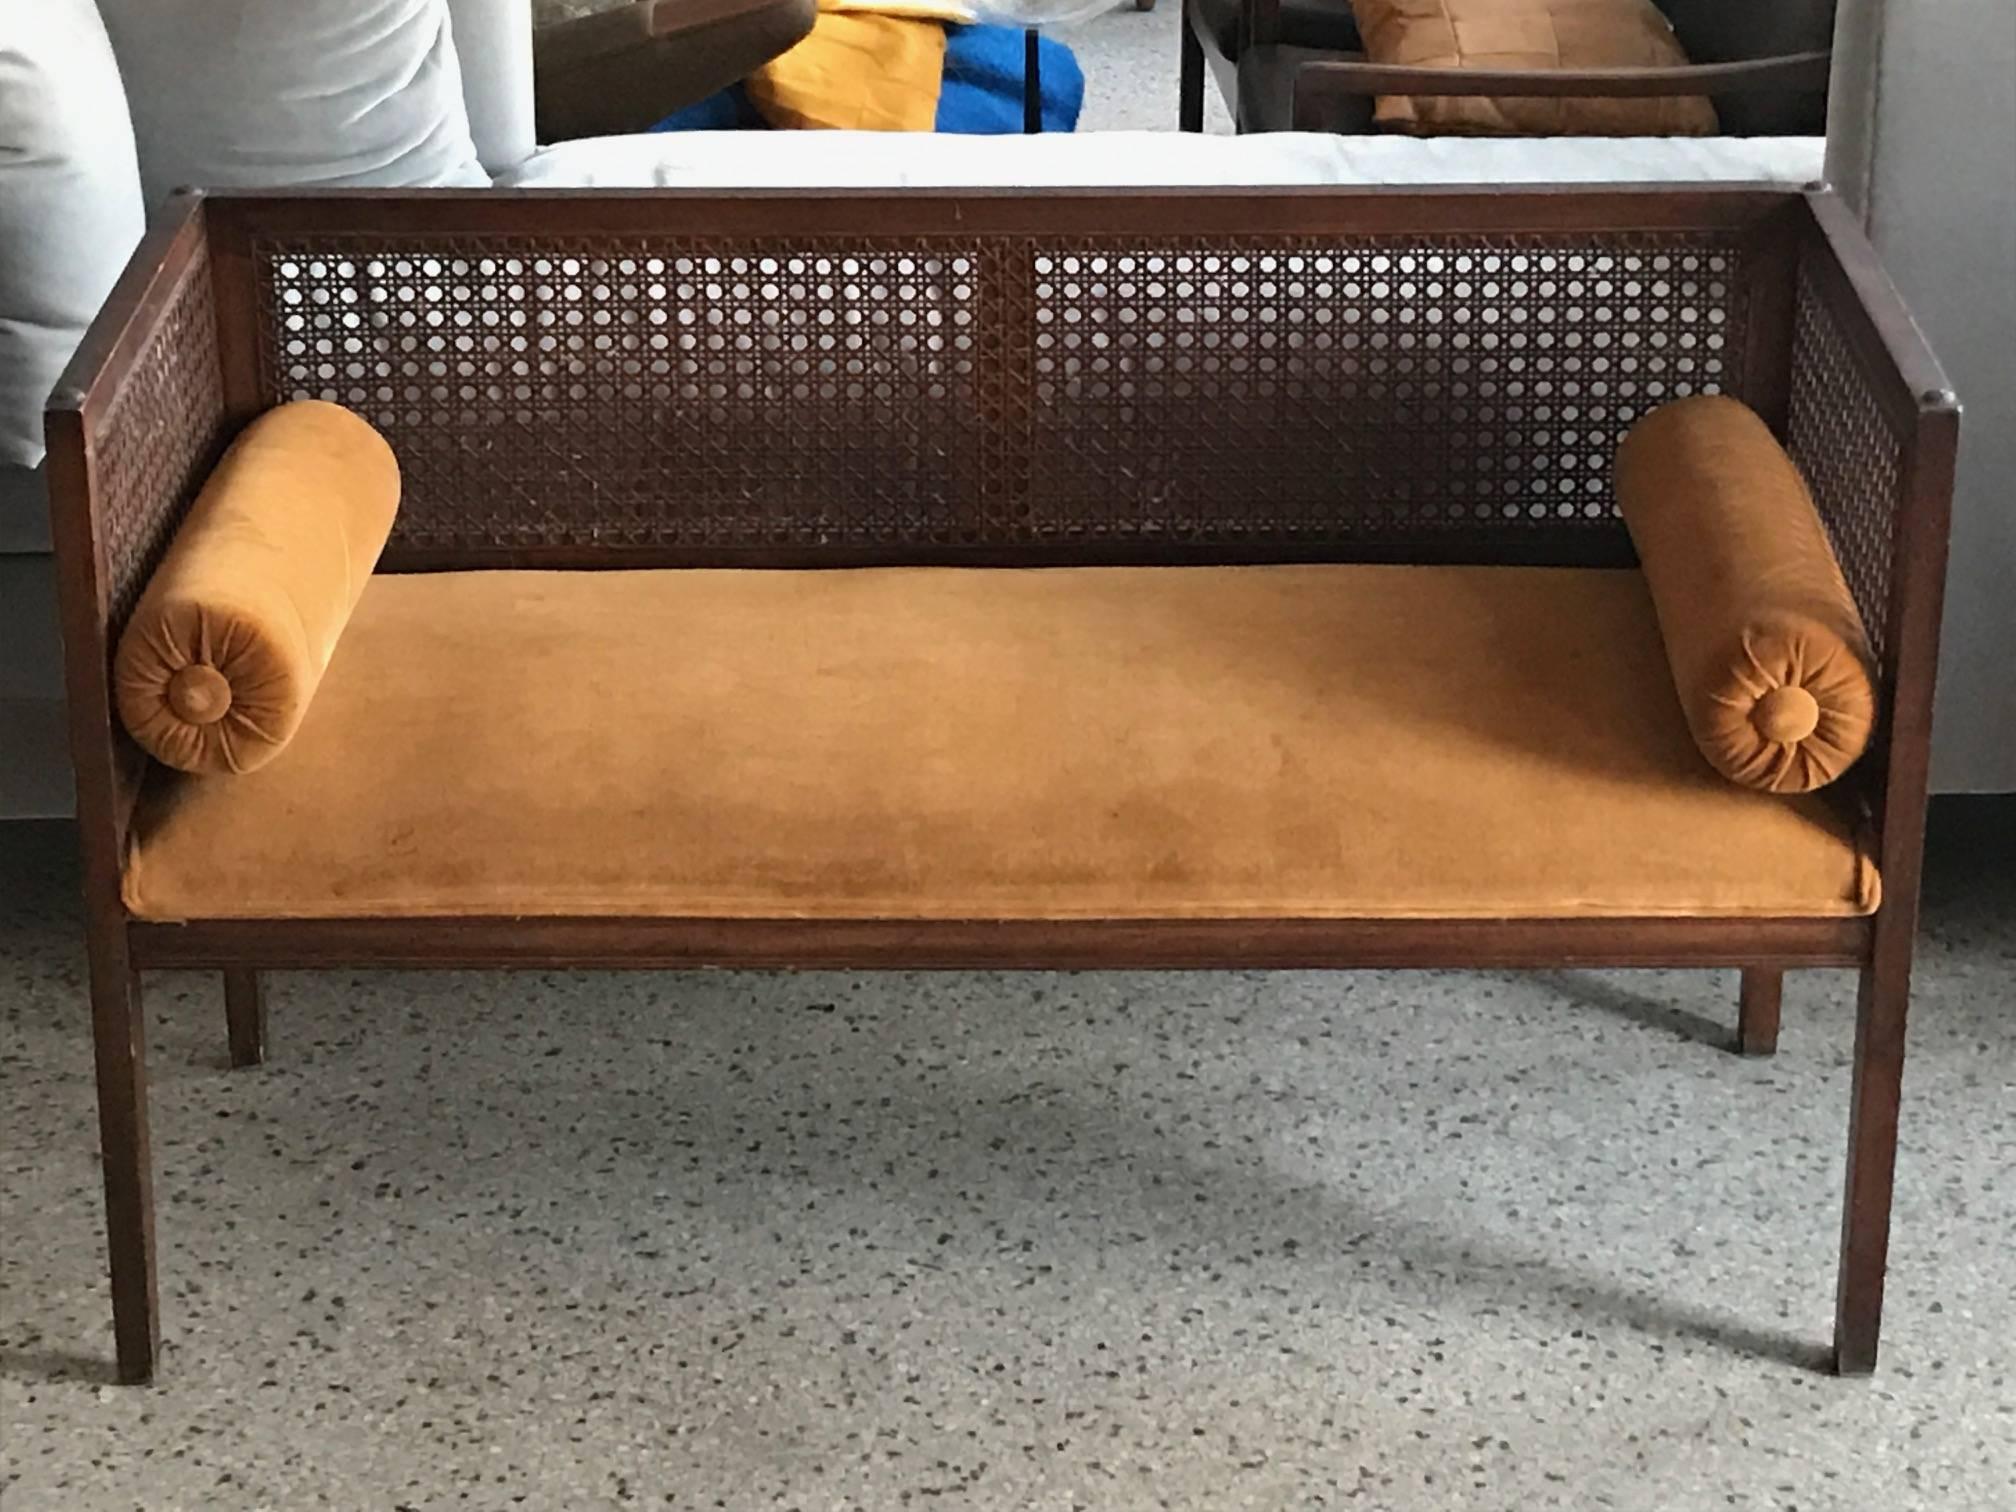 An elegant baquette-entry bench. Caned sides and back, upholstered seat with bolster cushions. Seat height is approximately 16.5